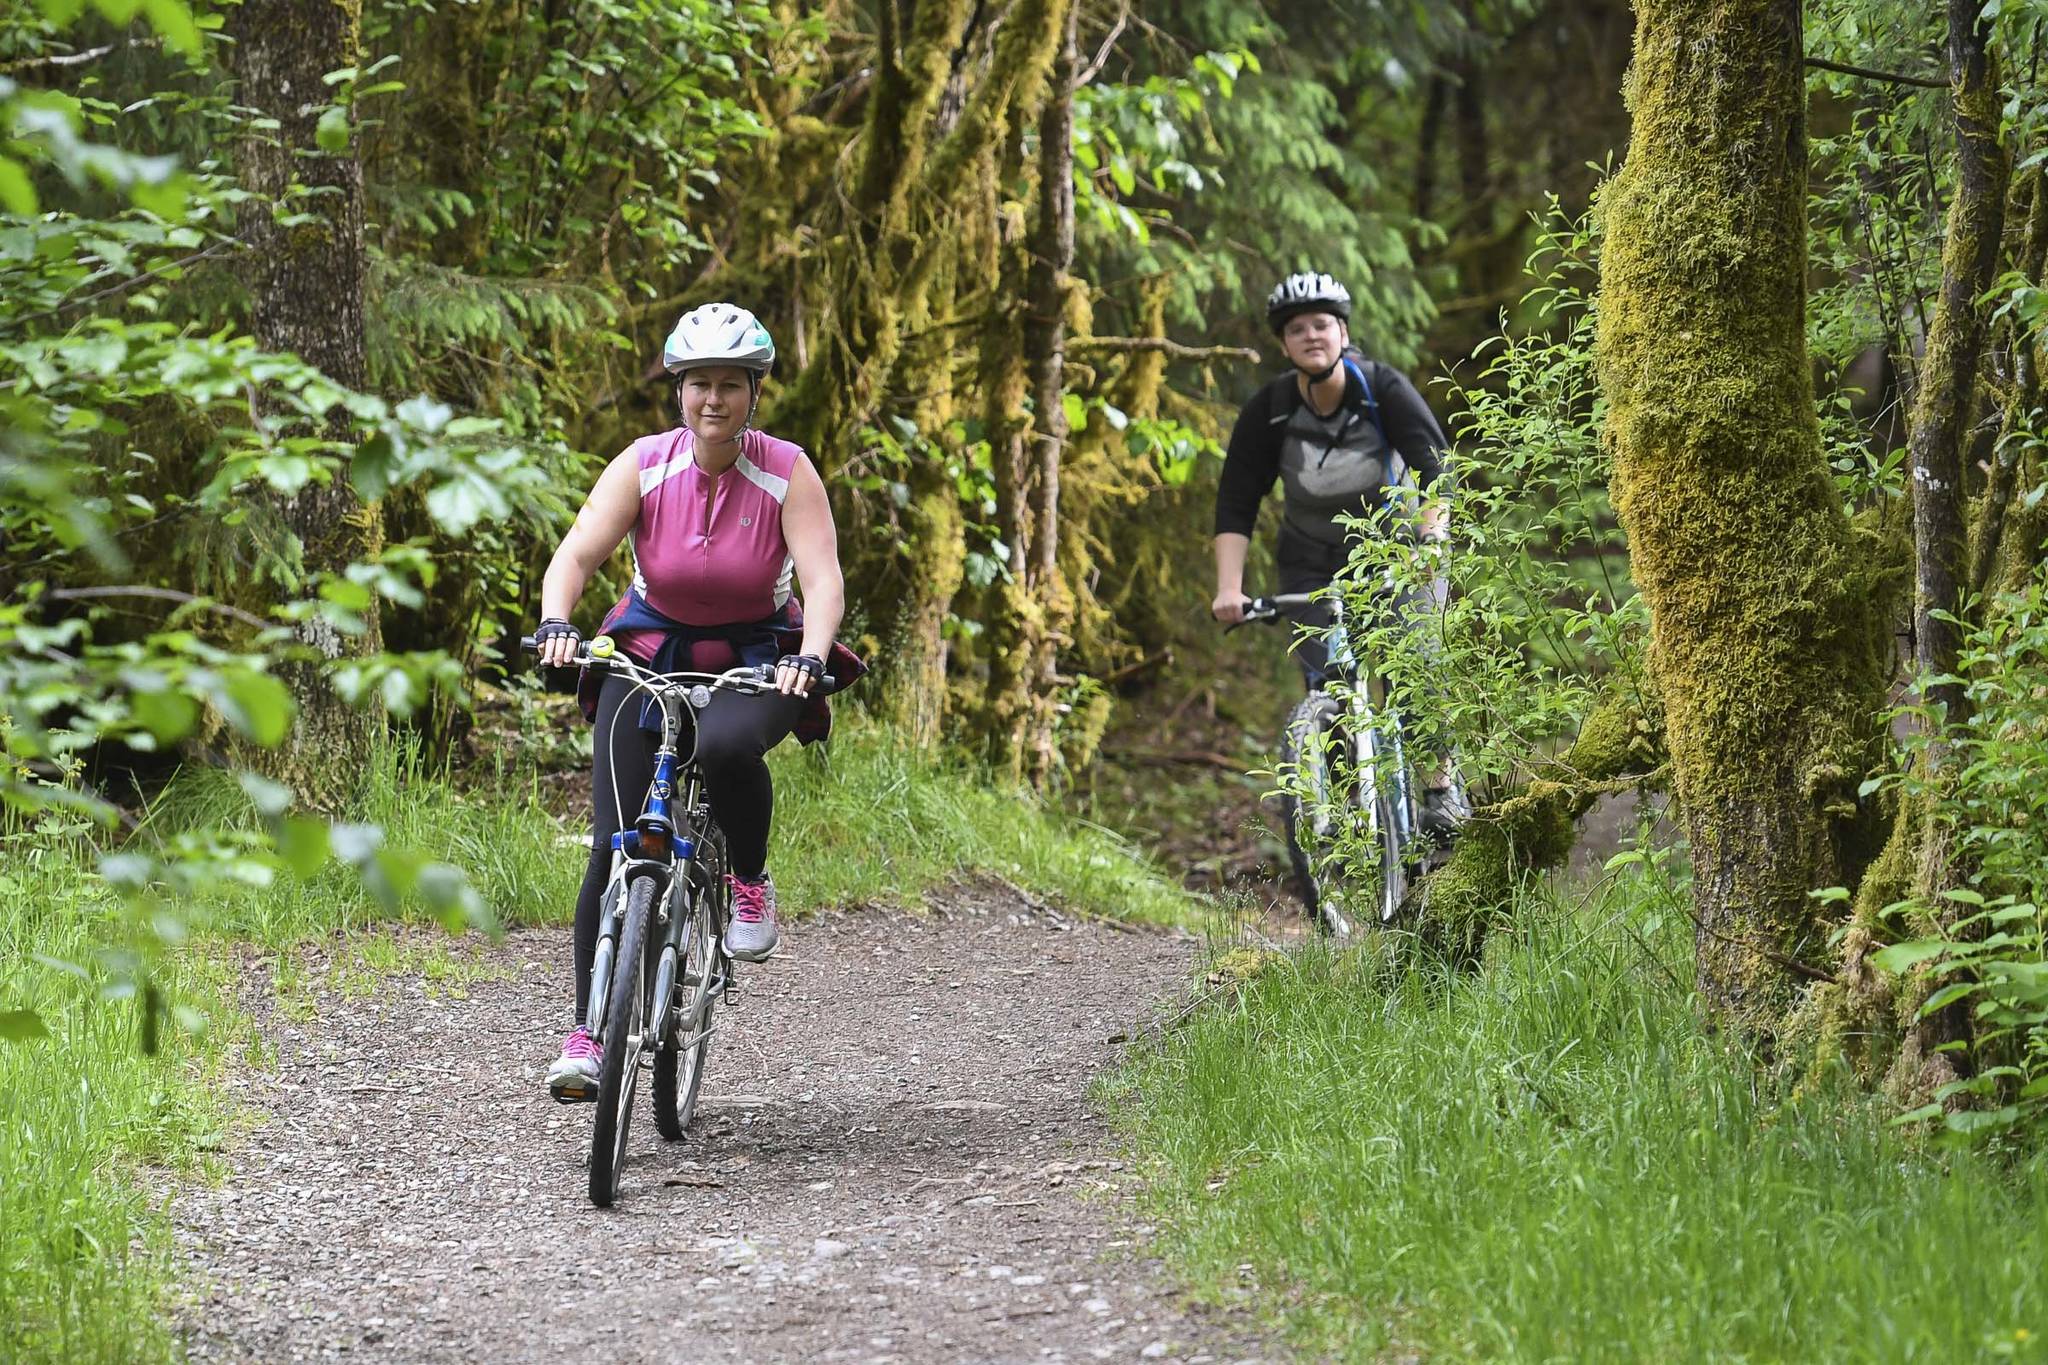 Tana O’Leary, left, rides her mountain bicycle with Nicole Dwyer during a women’s mountain bike ride at Dredge Lakes on Thursday, June 13, 2019. (Michael Penn | Juneau Empire)